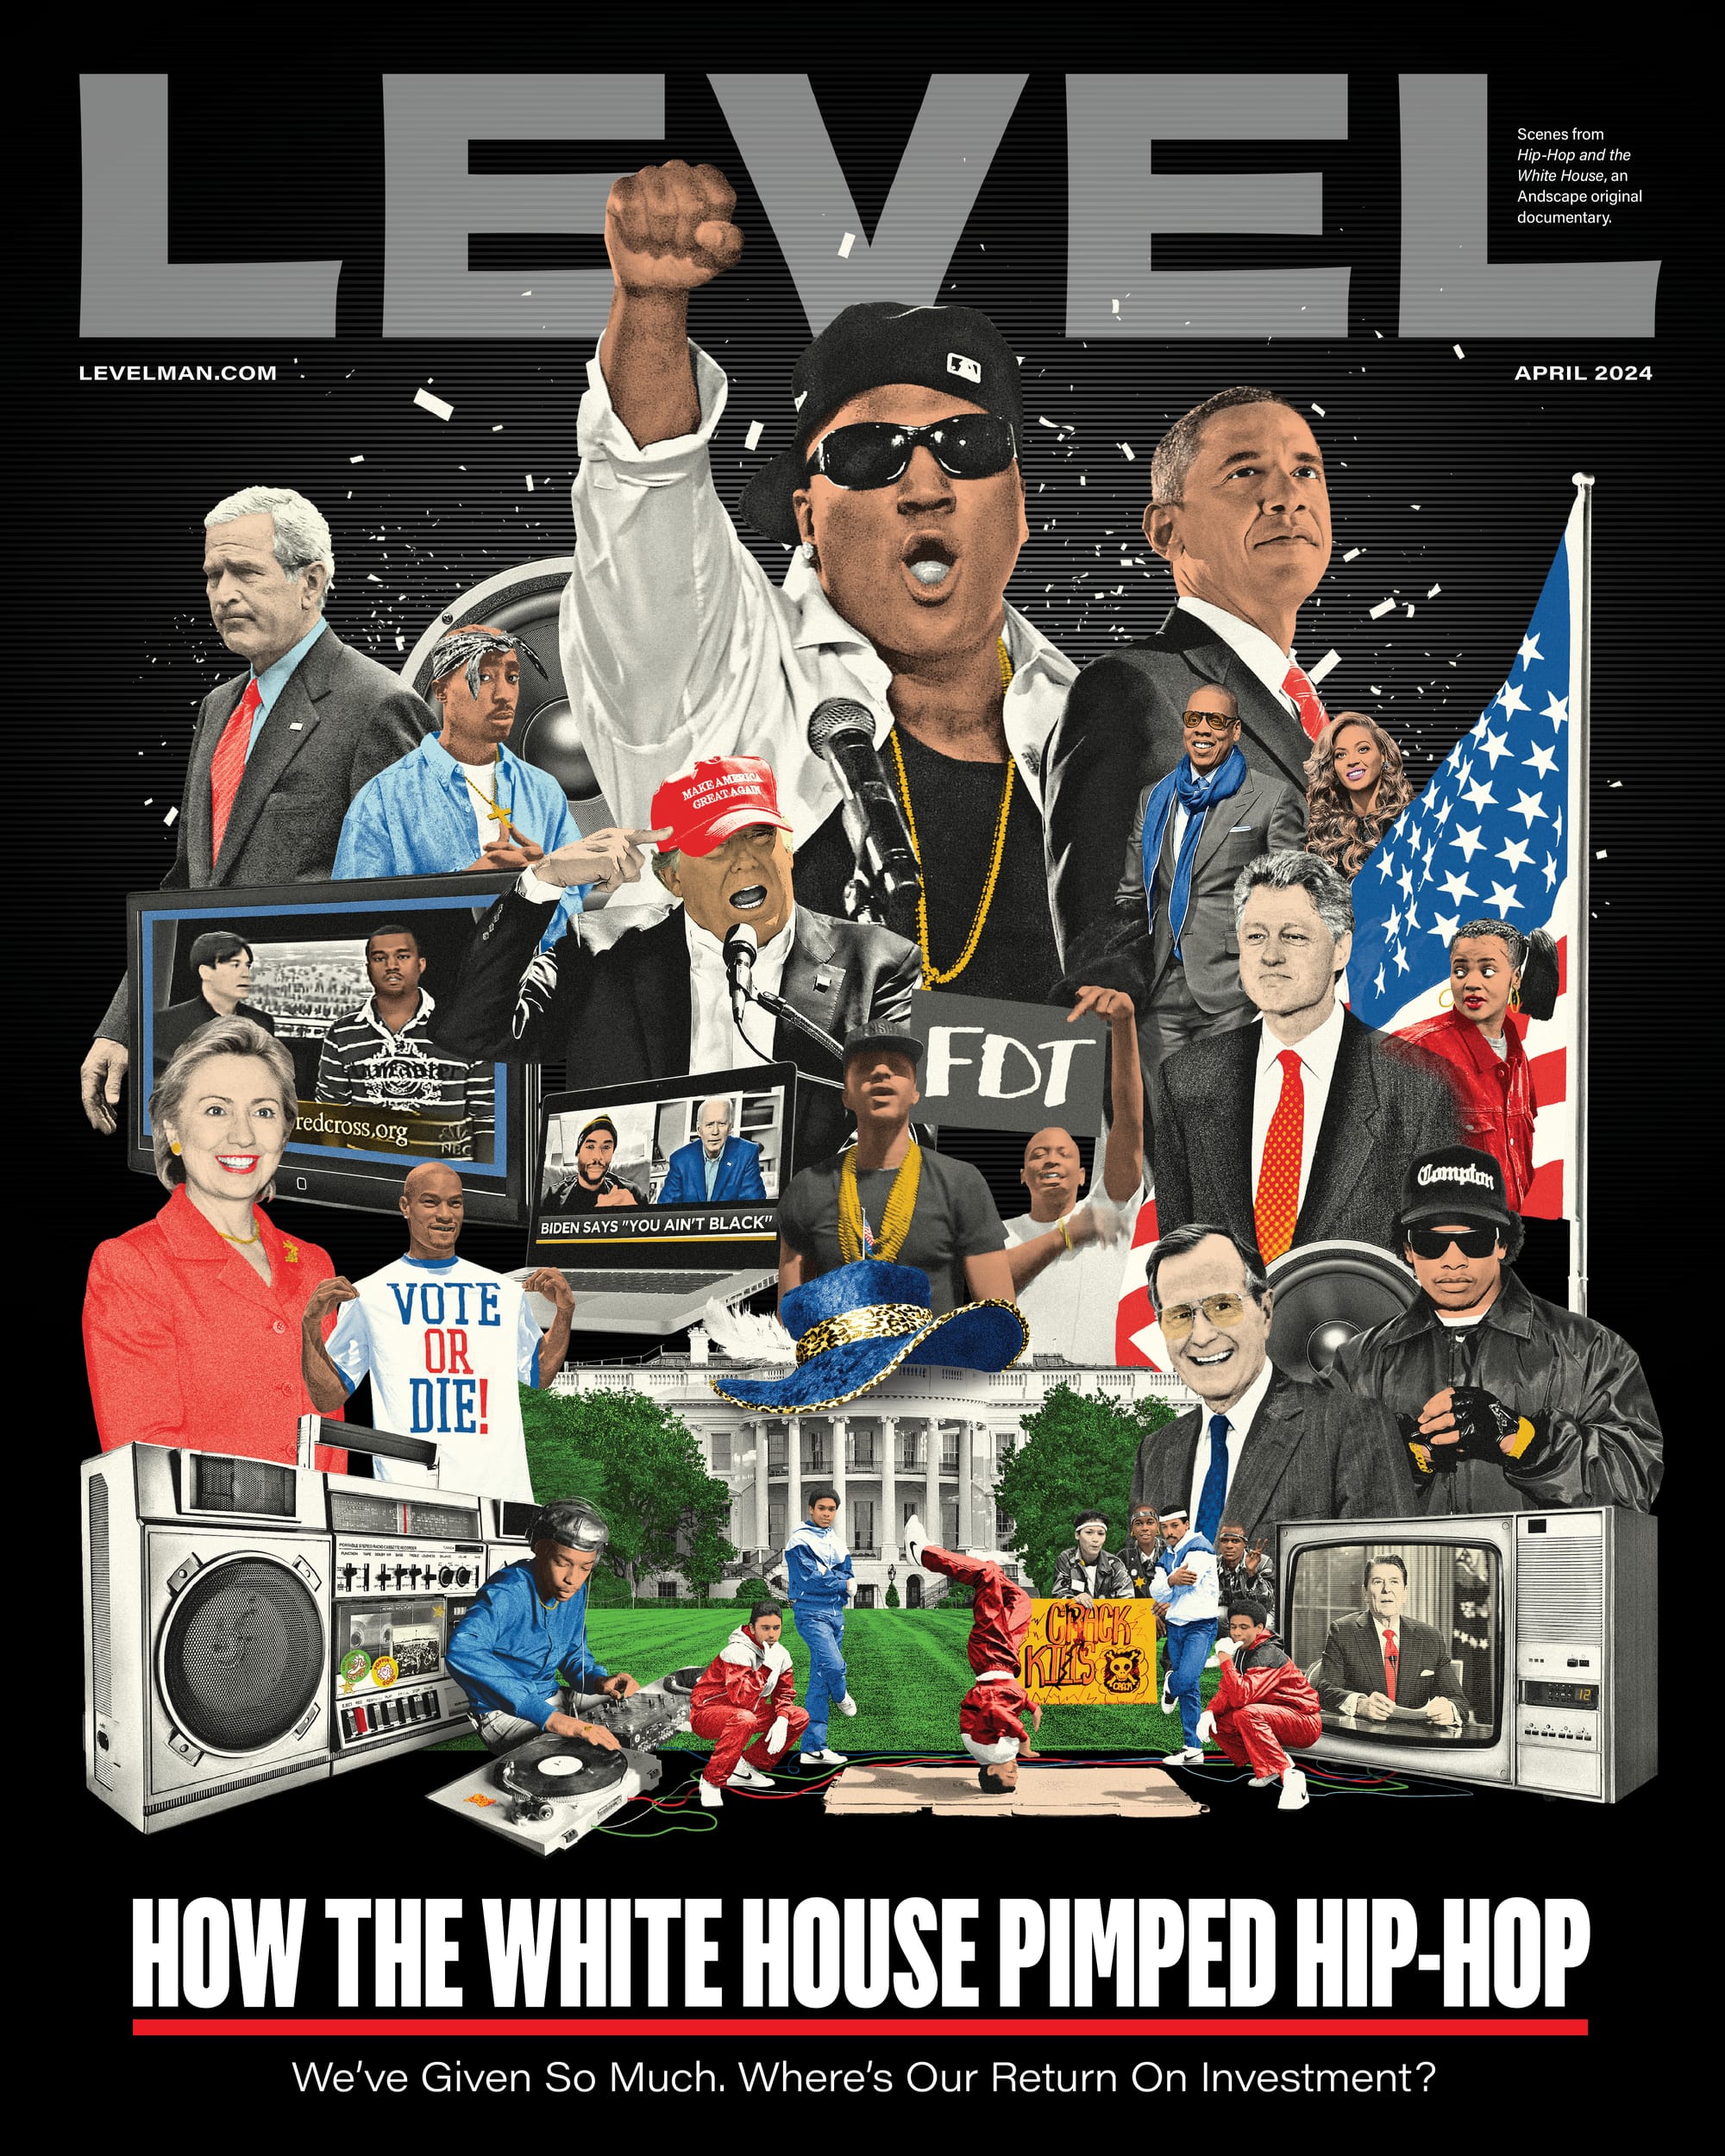 Hip-Hop and Politics: Who's Pimping Who?